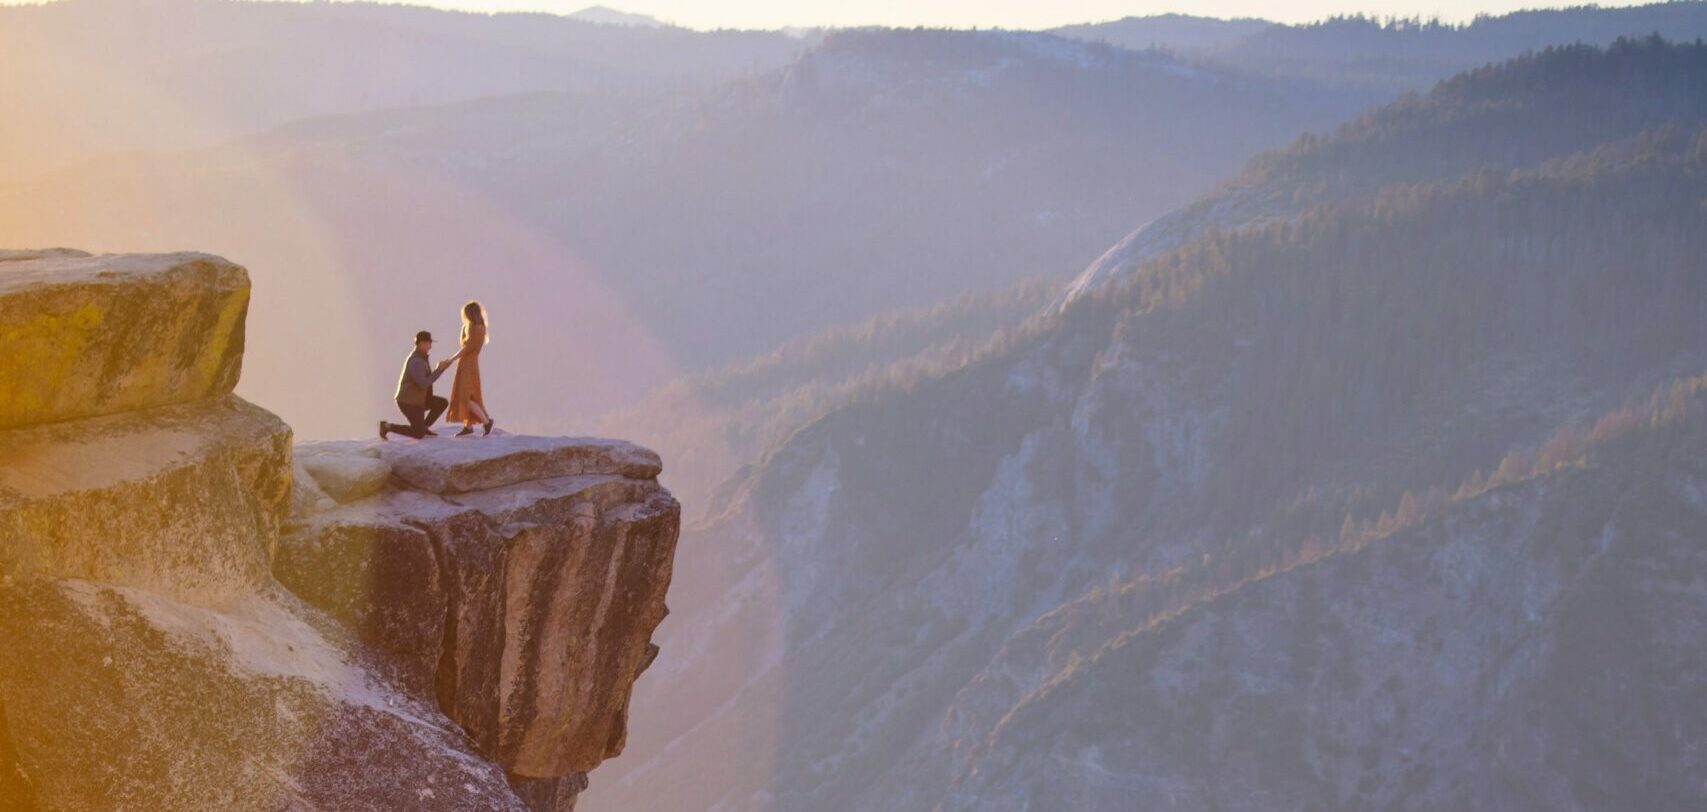 A man proposes to his partner at the mountain's edge, framed by breathtaking scenery.